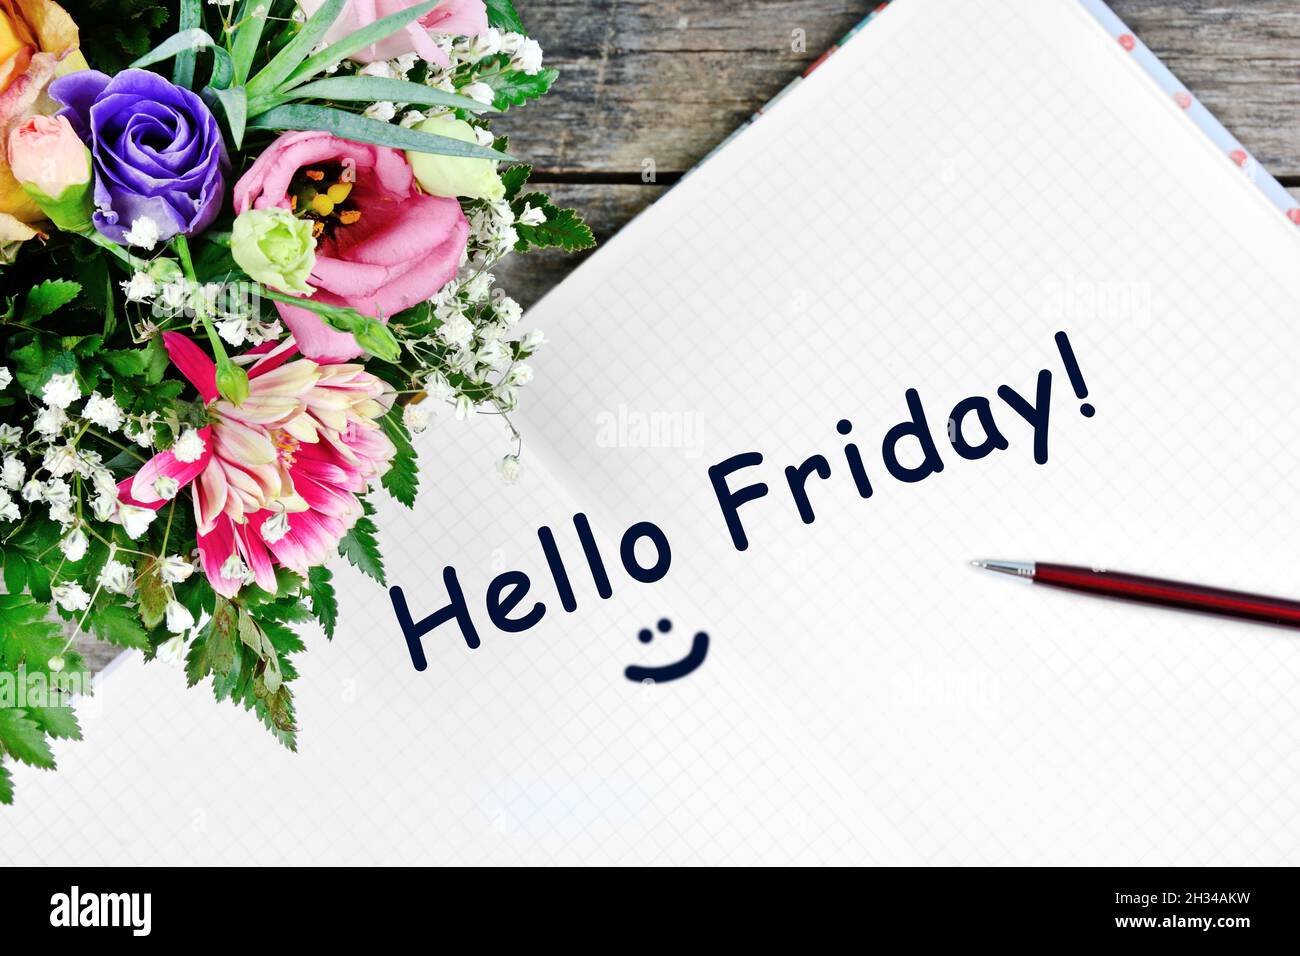 Hello friday words on notebook page. Top view Stock Photo